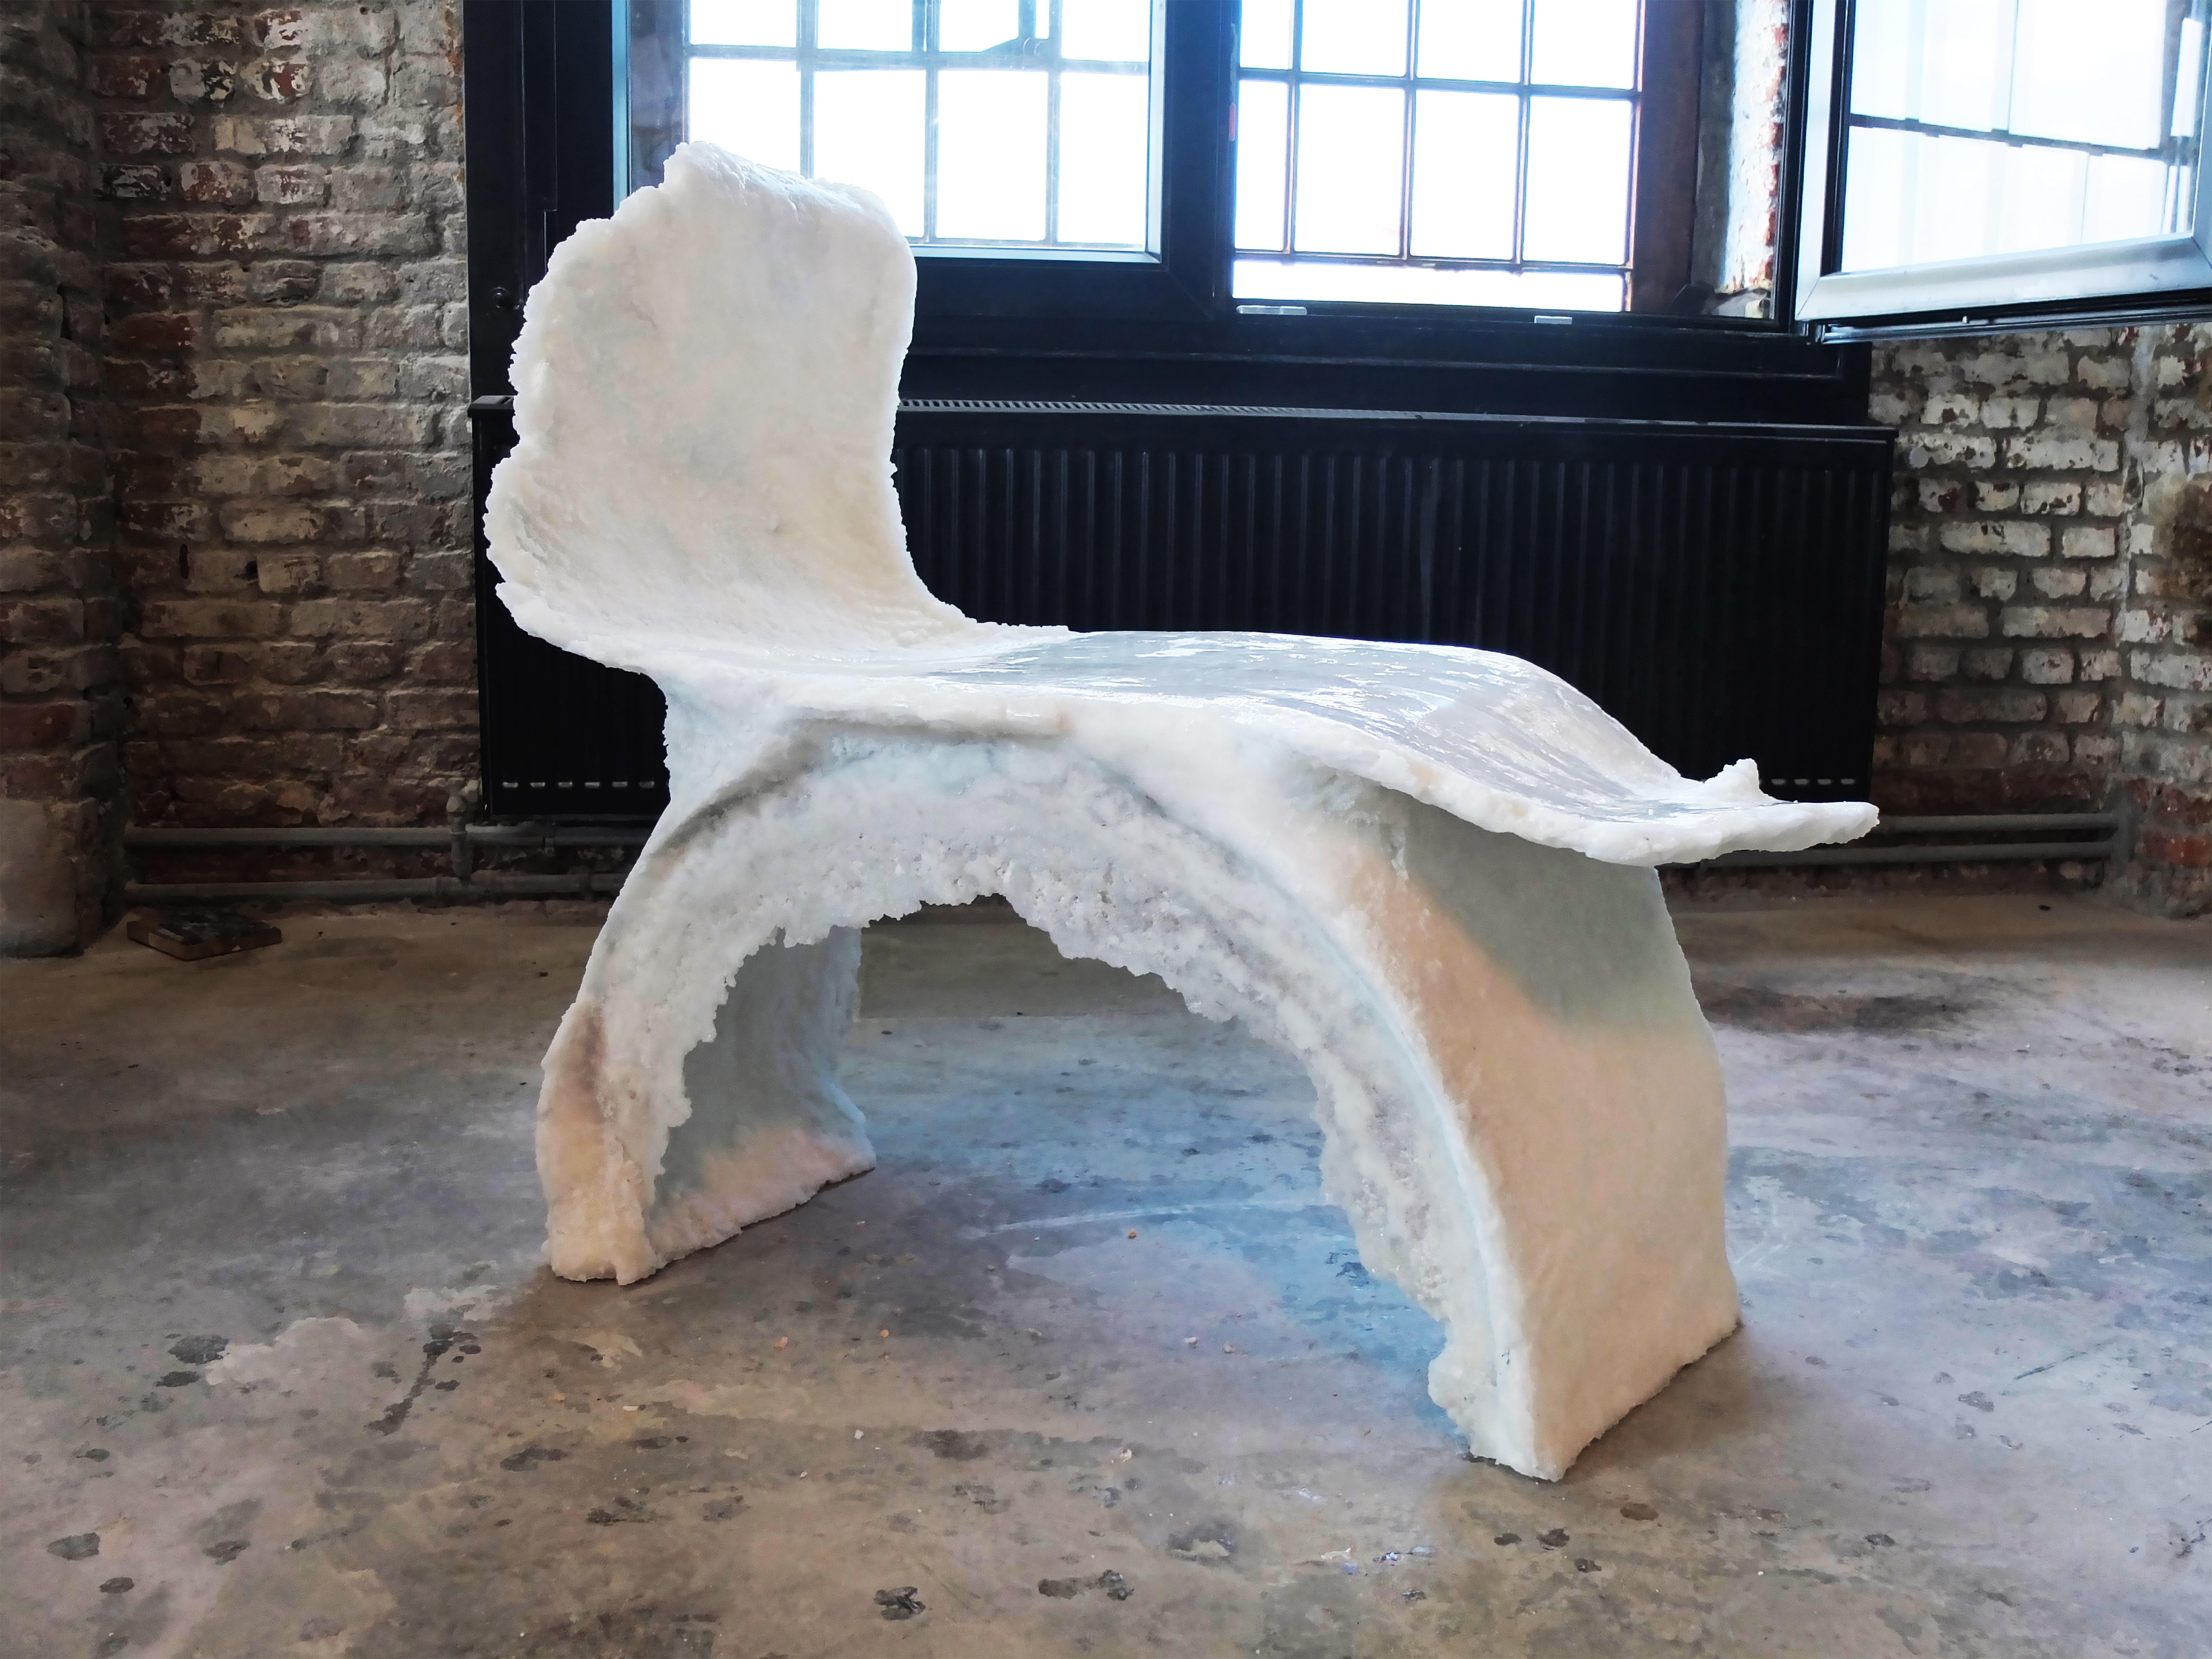 Pyche's chair by Roxane Lahidji.
Dimensions: D 100 x W 57 x H 90 cm.
Materials: Marbled salt.

Roxane Lahidji is a social designer specializing in ecological material developments and applications. Her research focuses on achieving